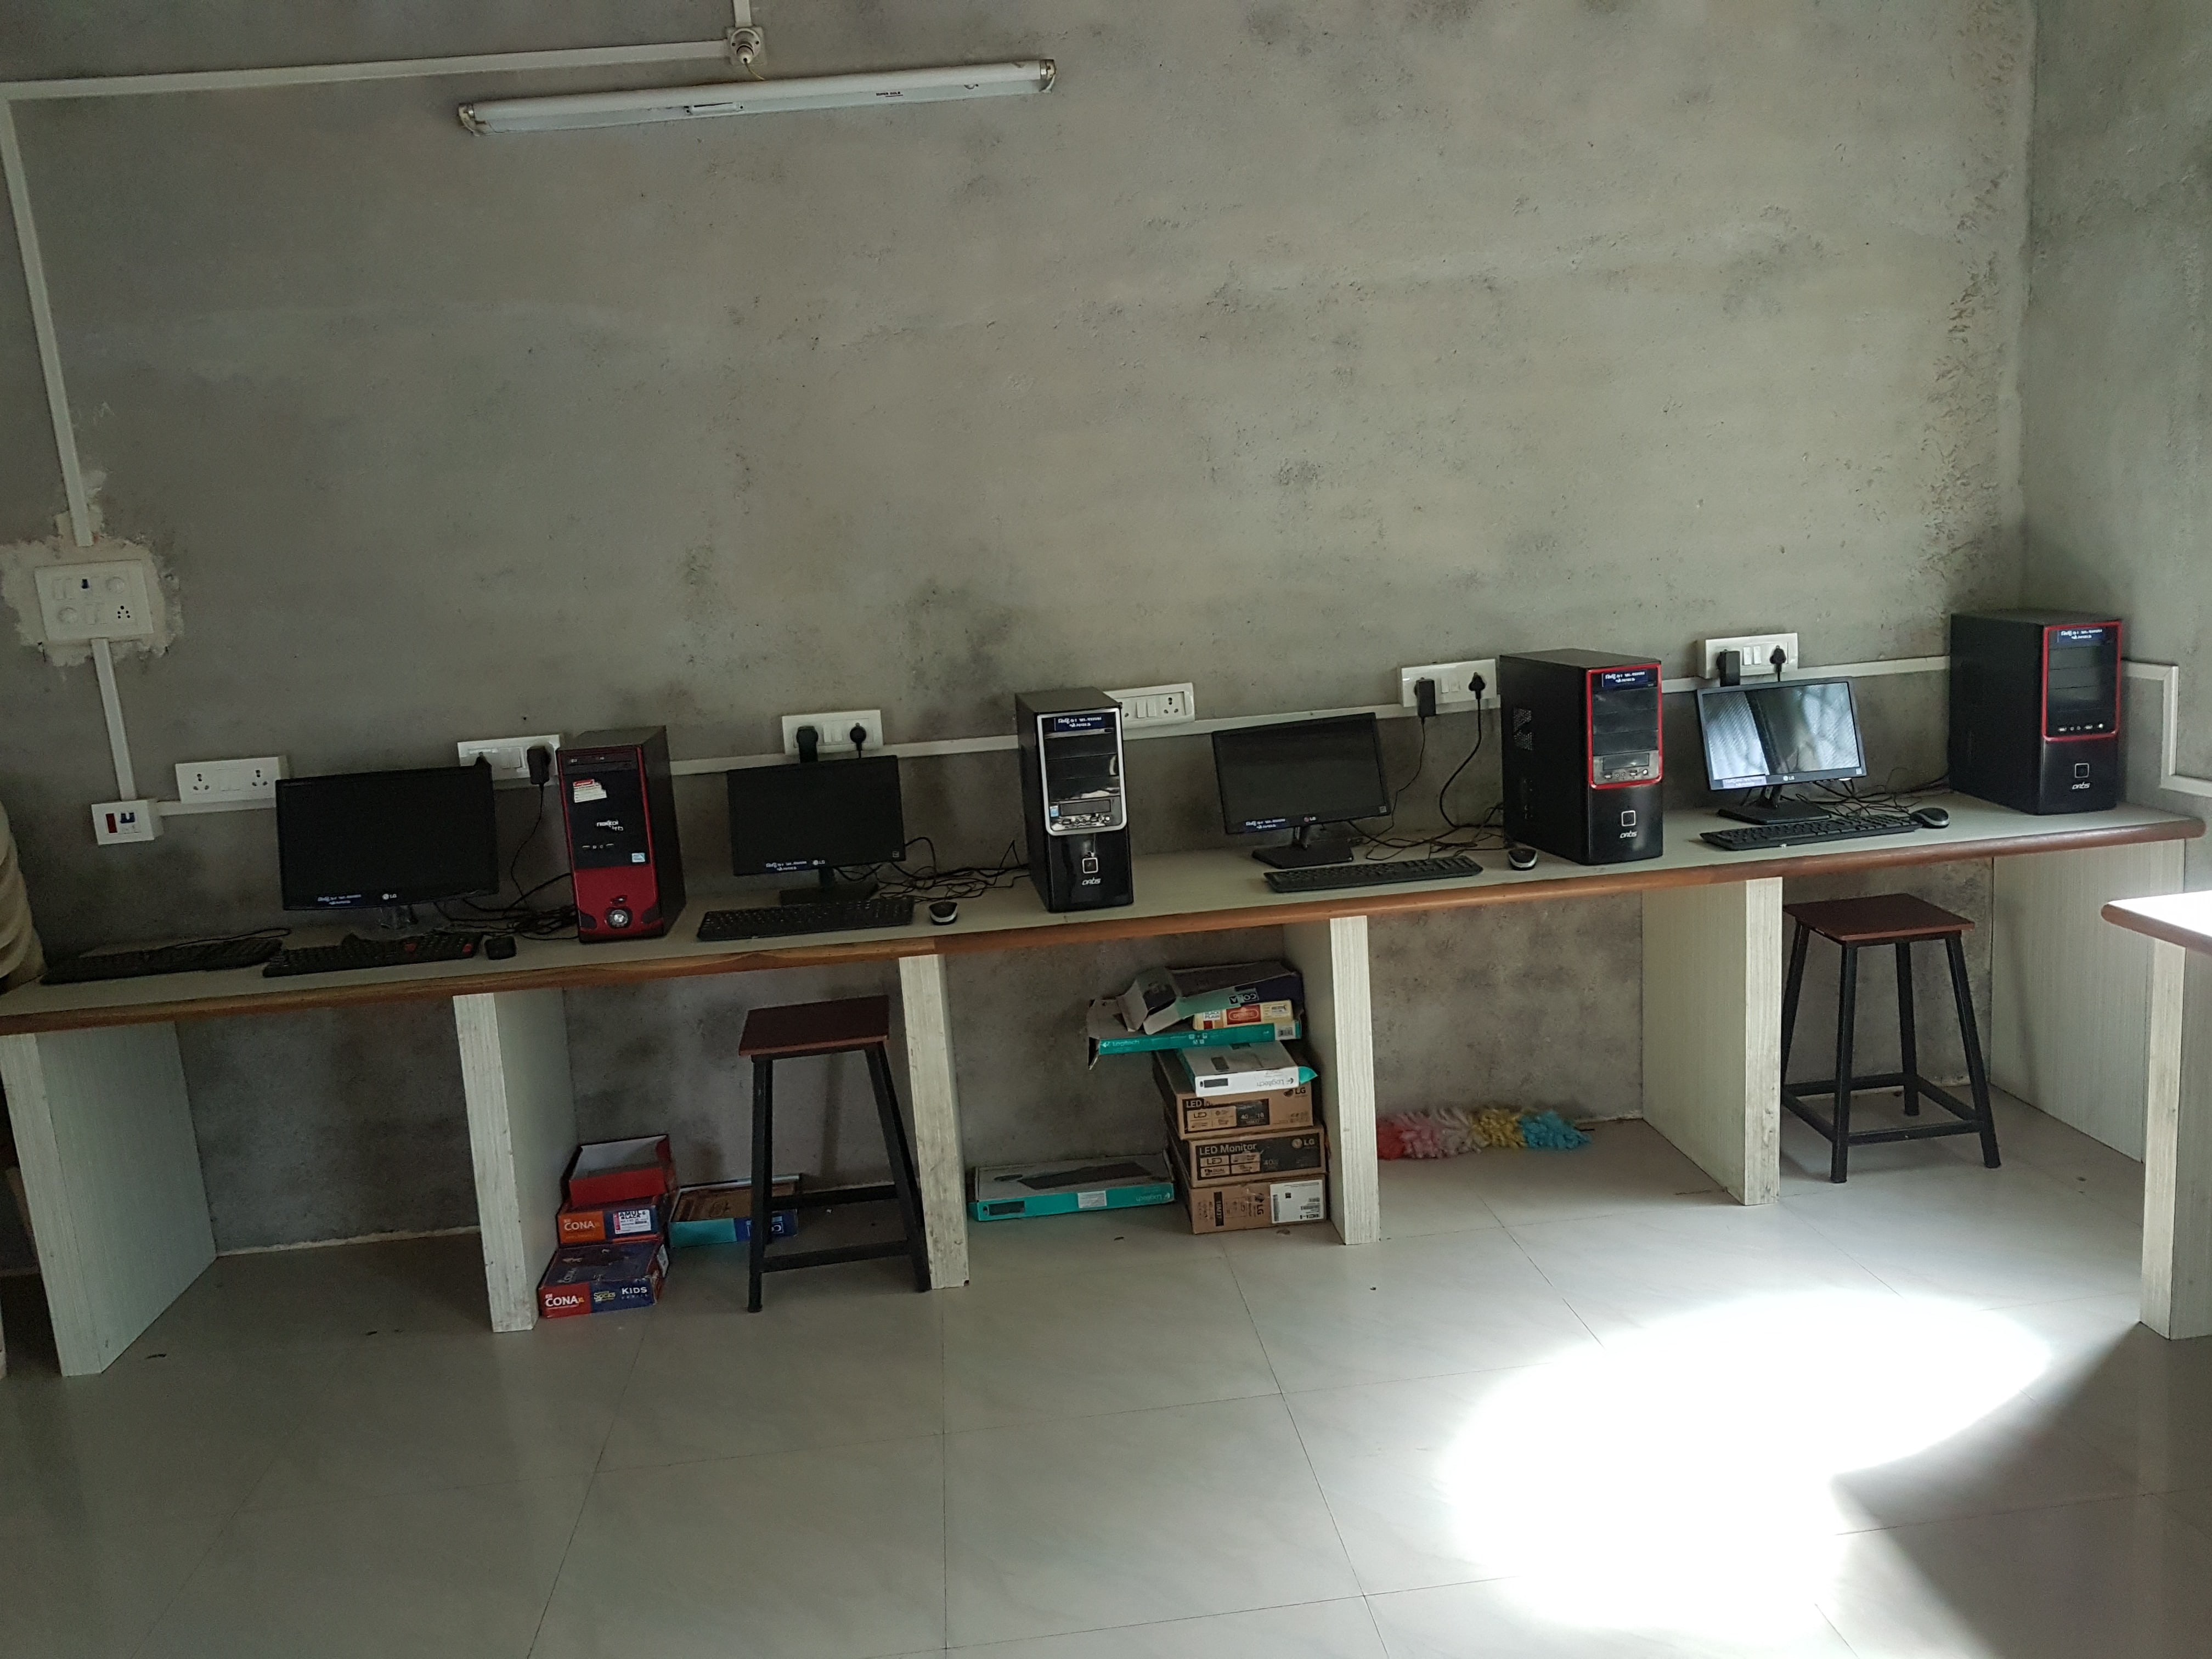 Set of Computers in a classroom